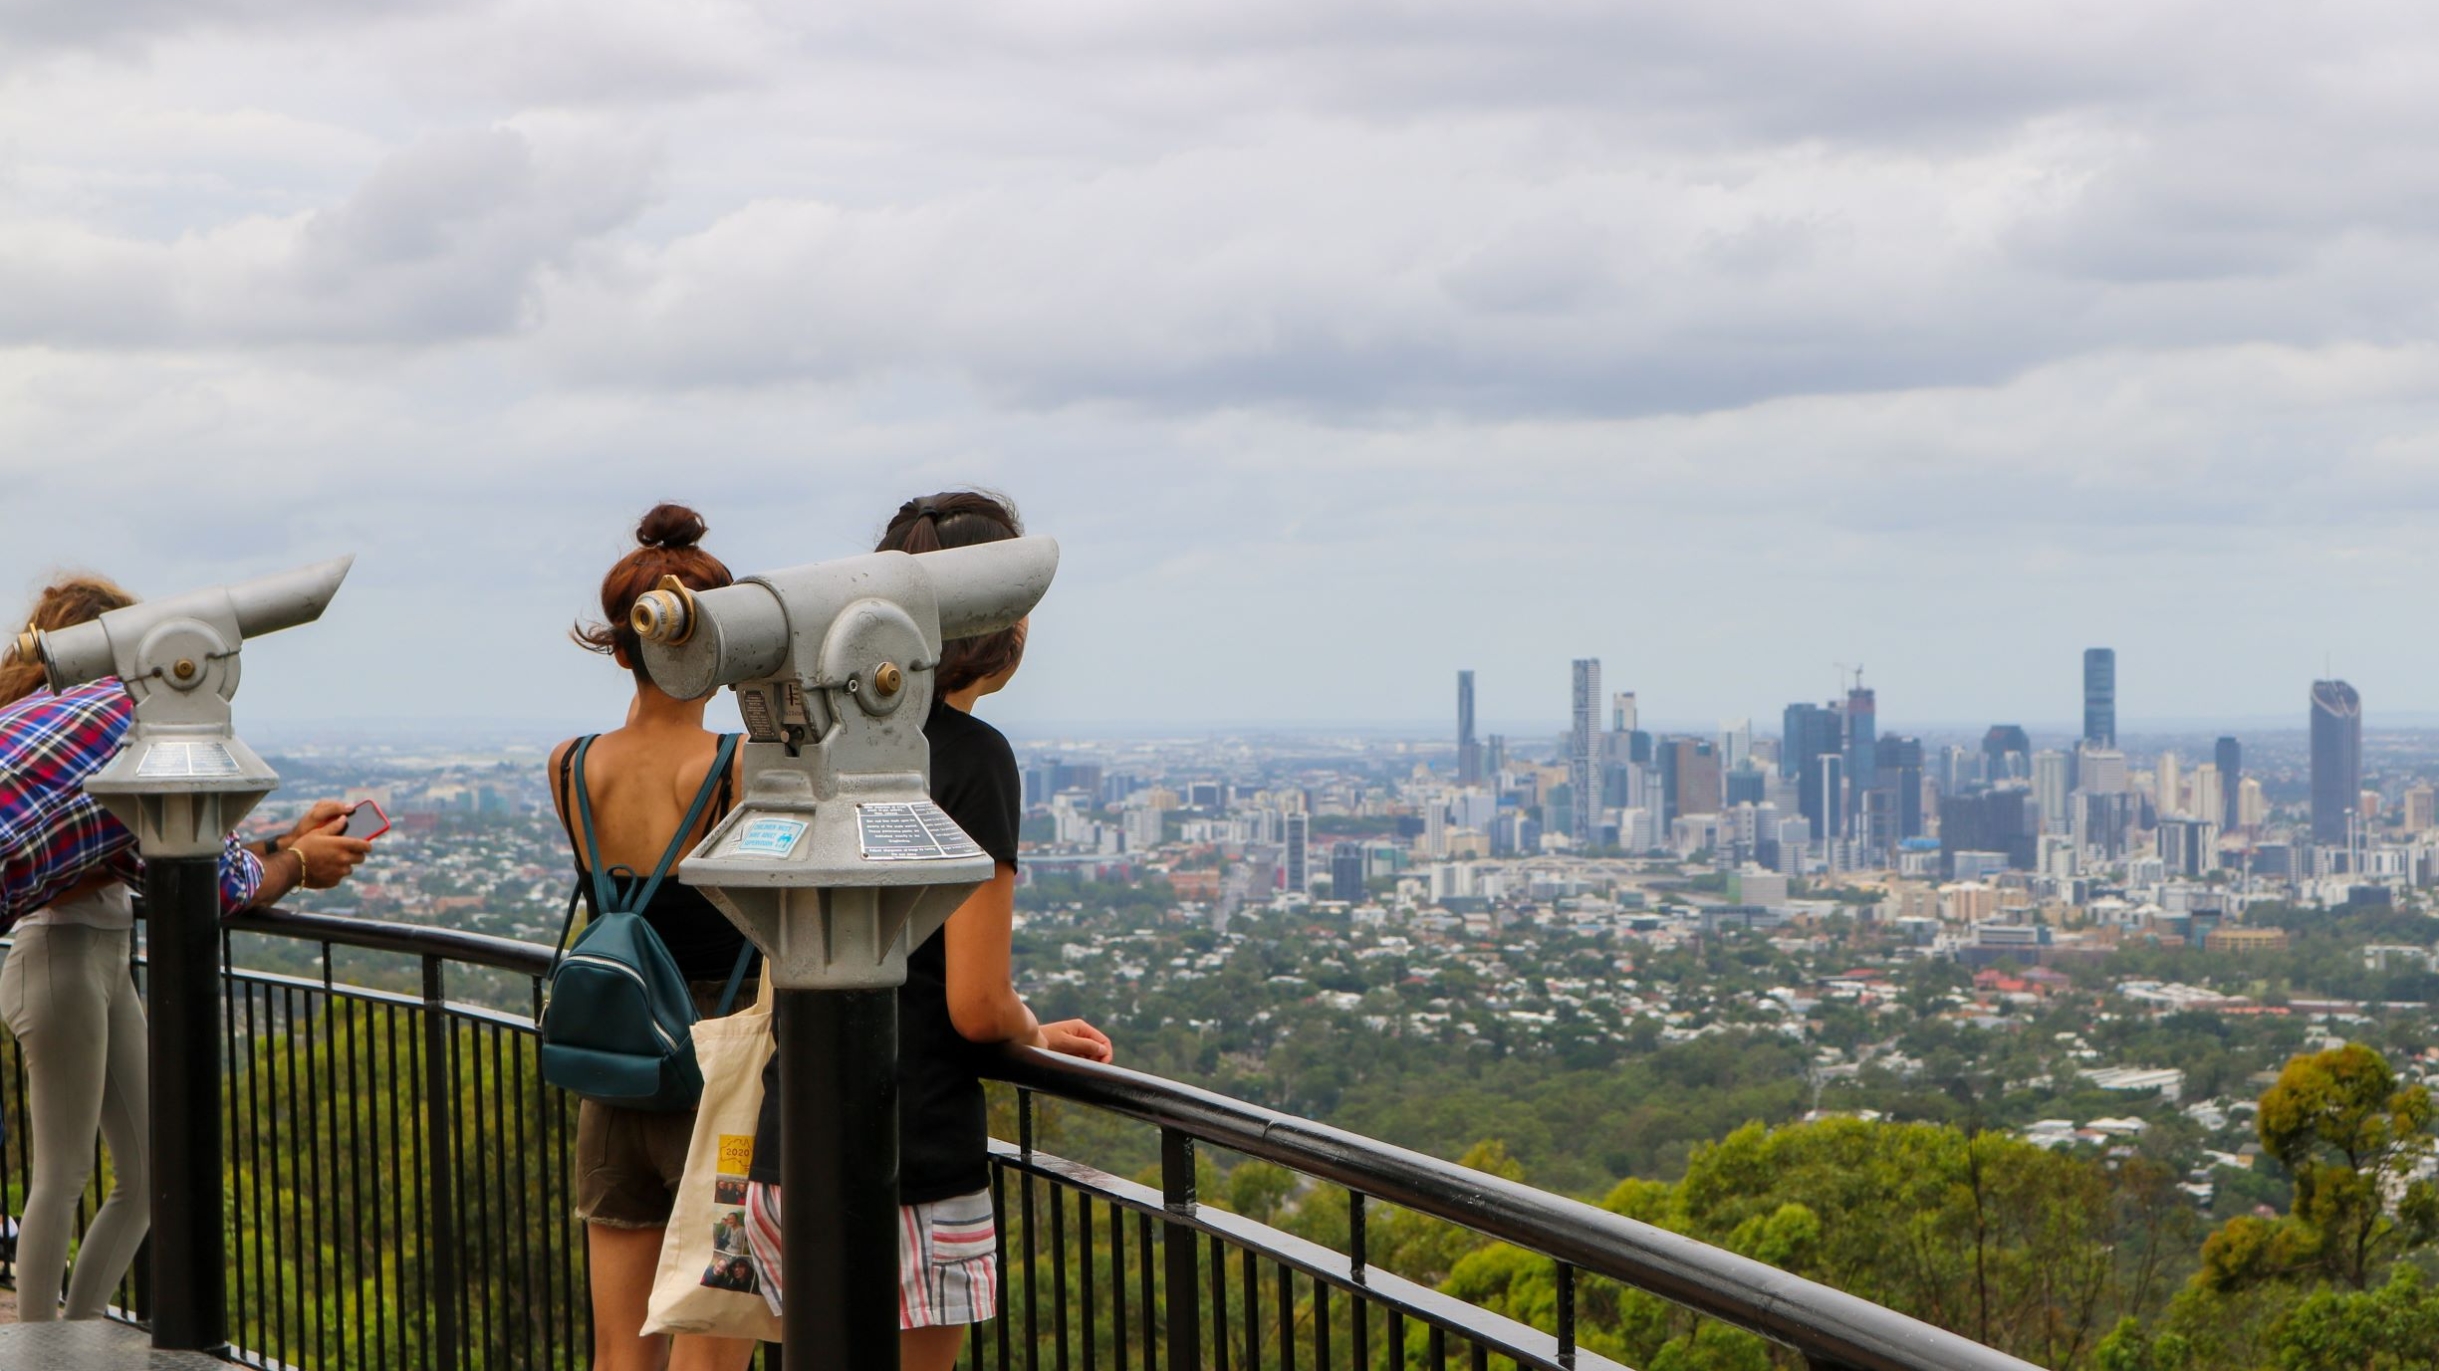 Mt. Coot-Tha Lookout